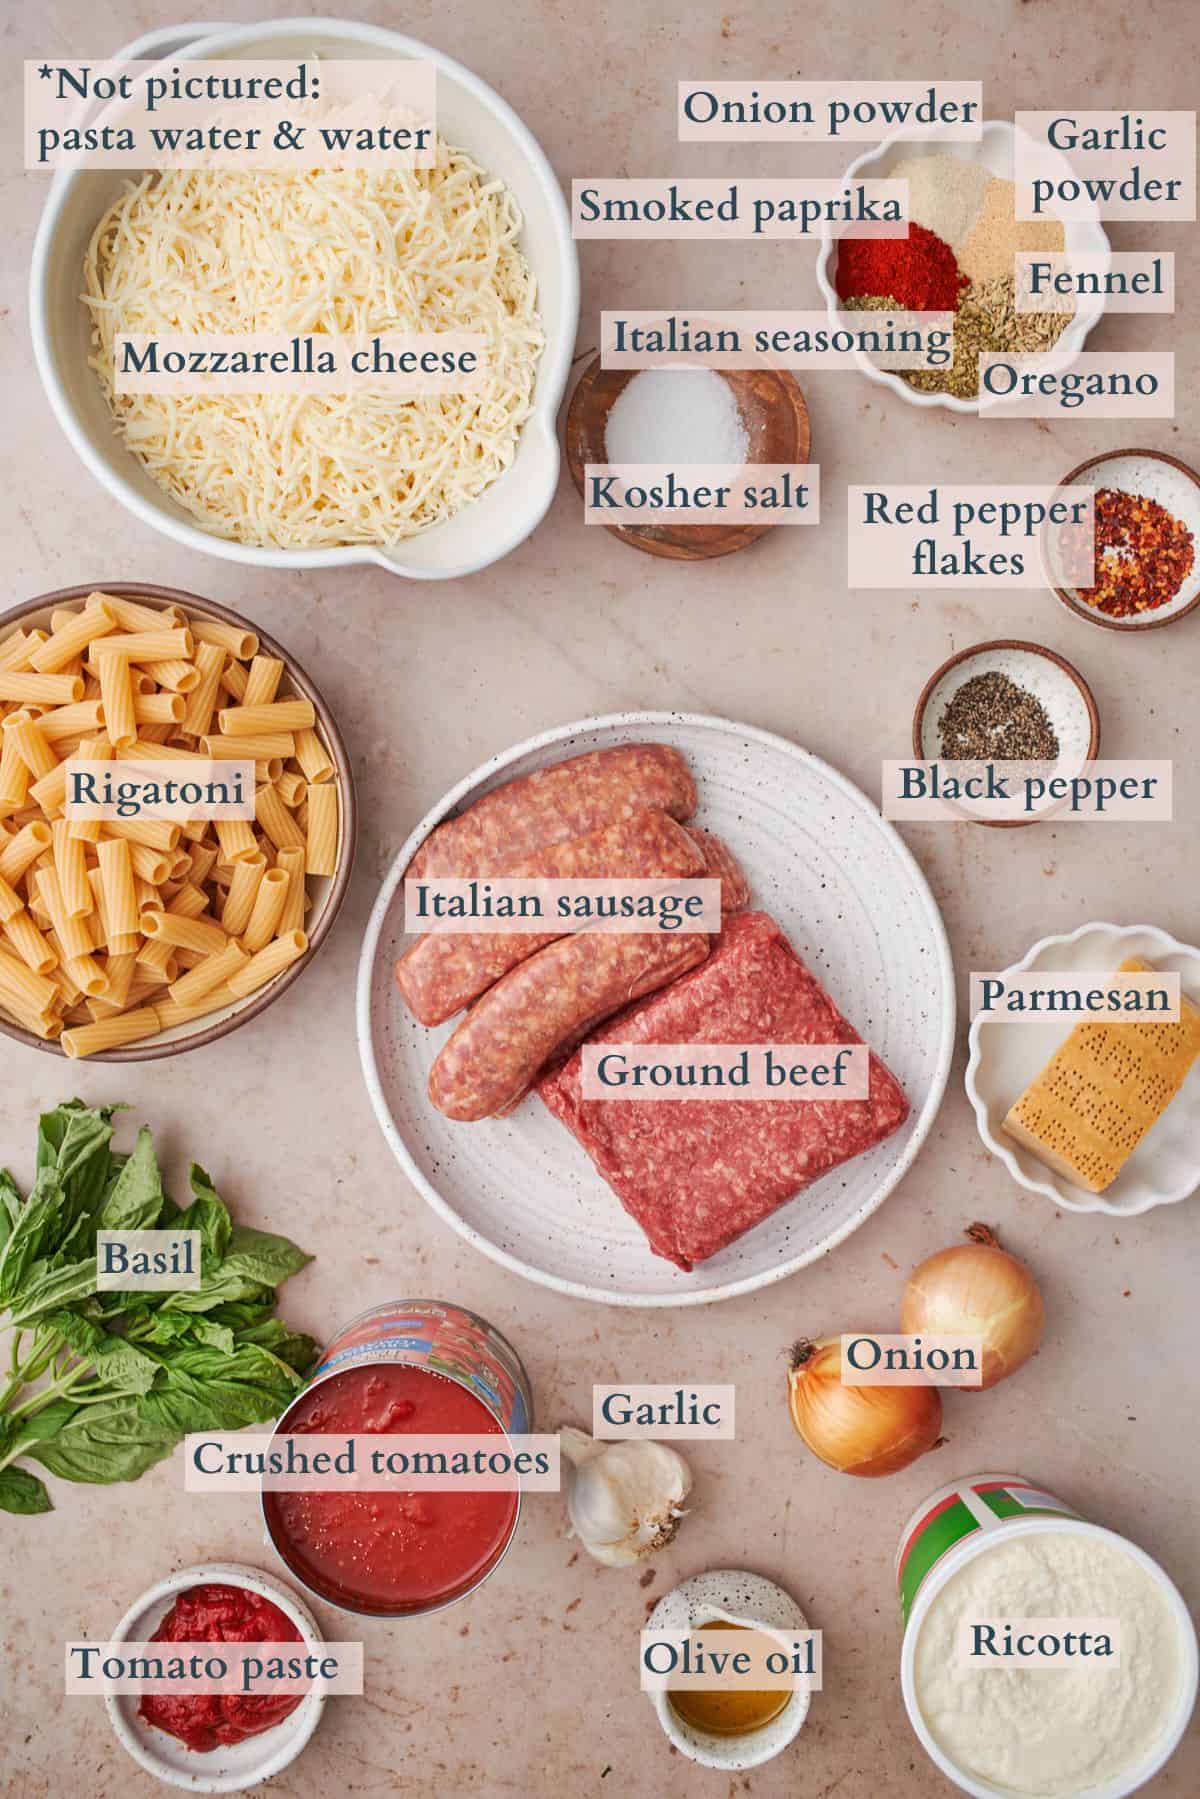 ingredients to make baked rigatoni with meat sauce laid out in bowls and on small plates labeled to denote each ingredient.